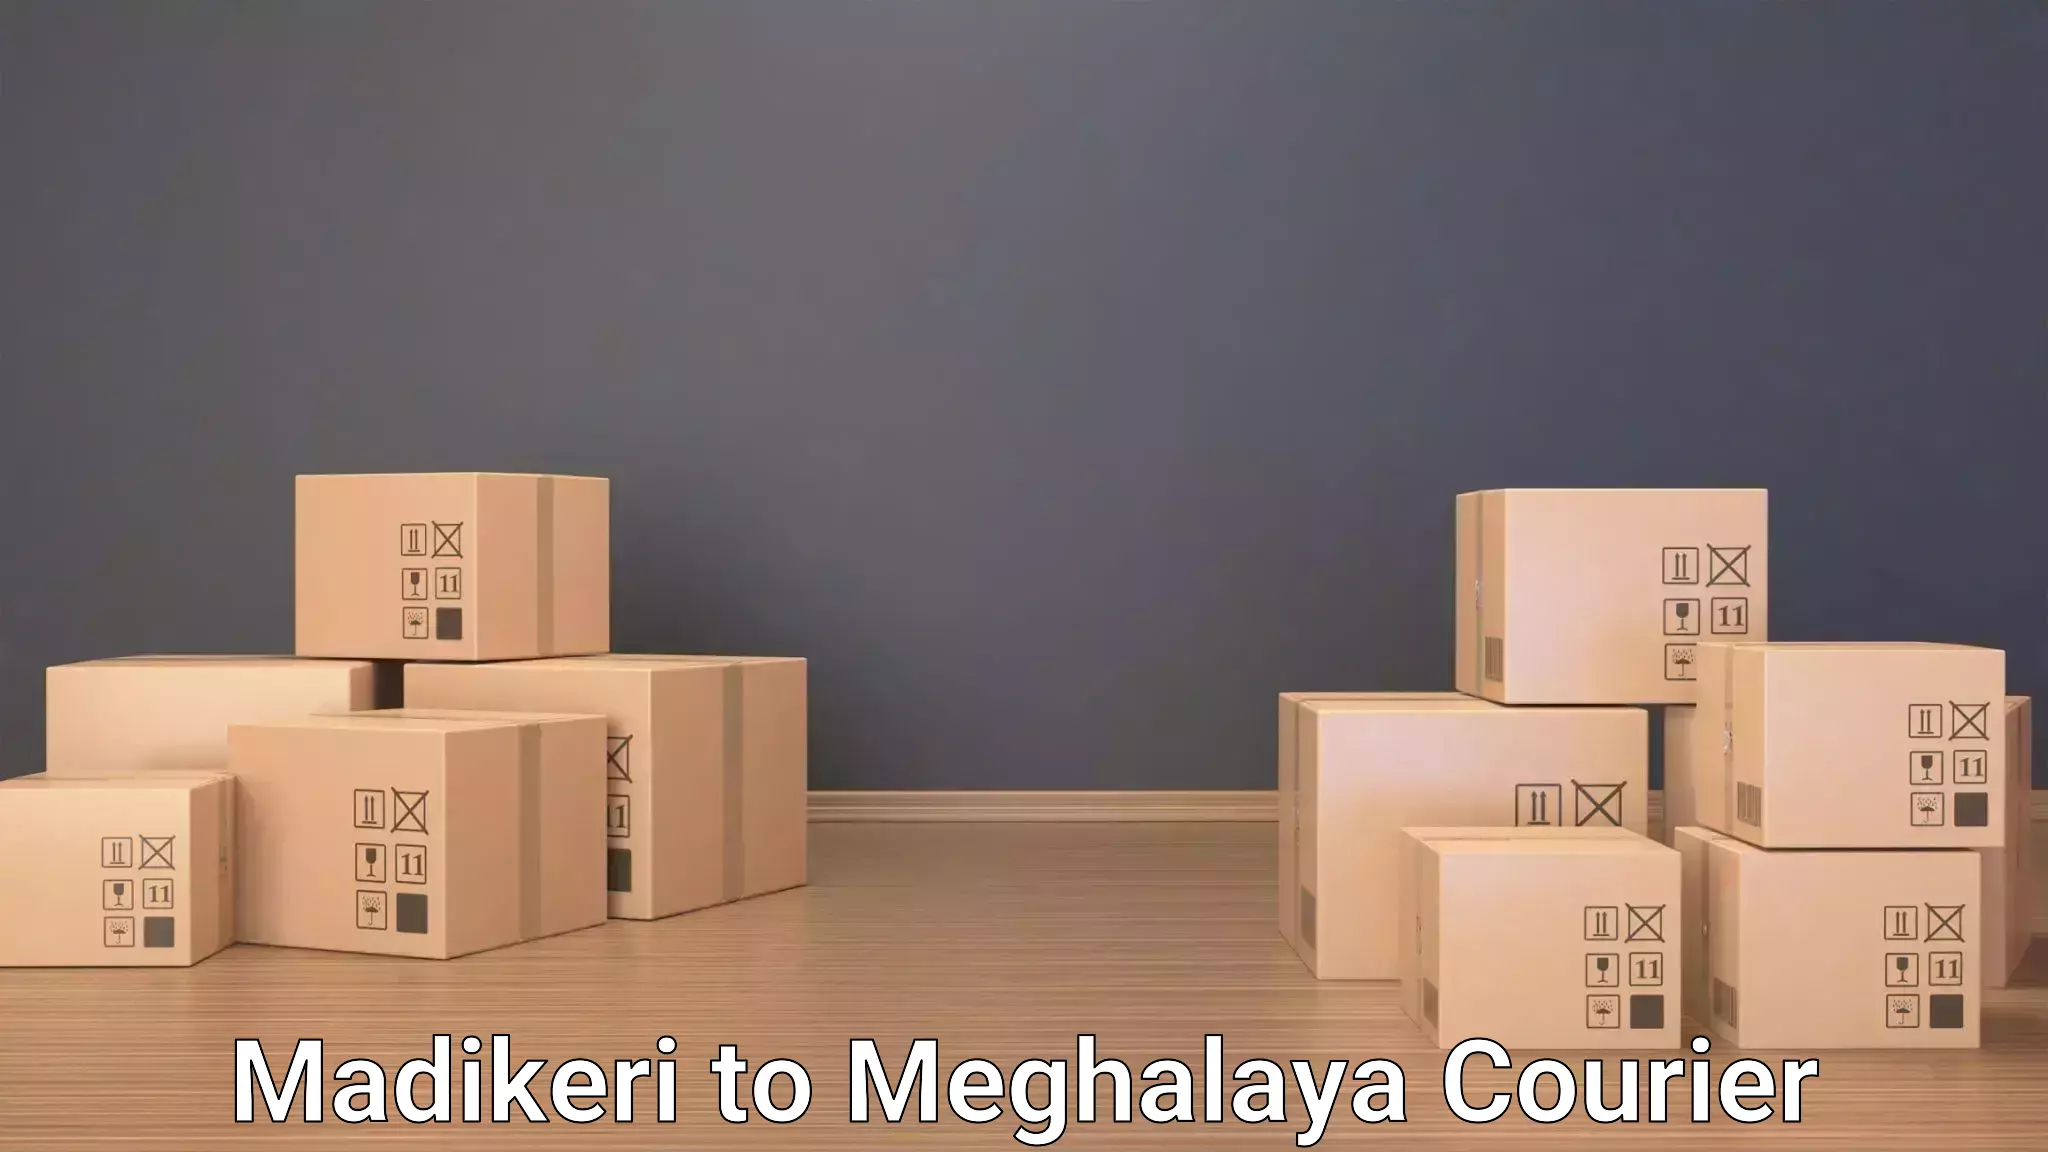 Luggage delivery app Madikeri to Tura